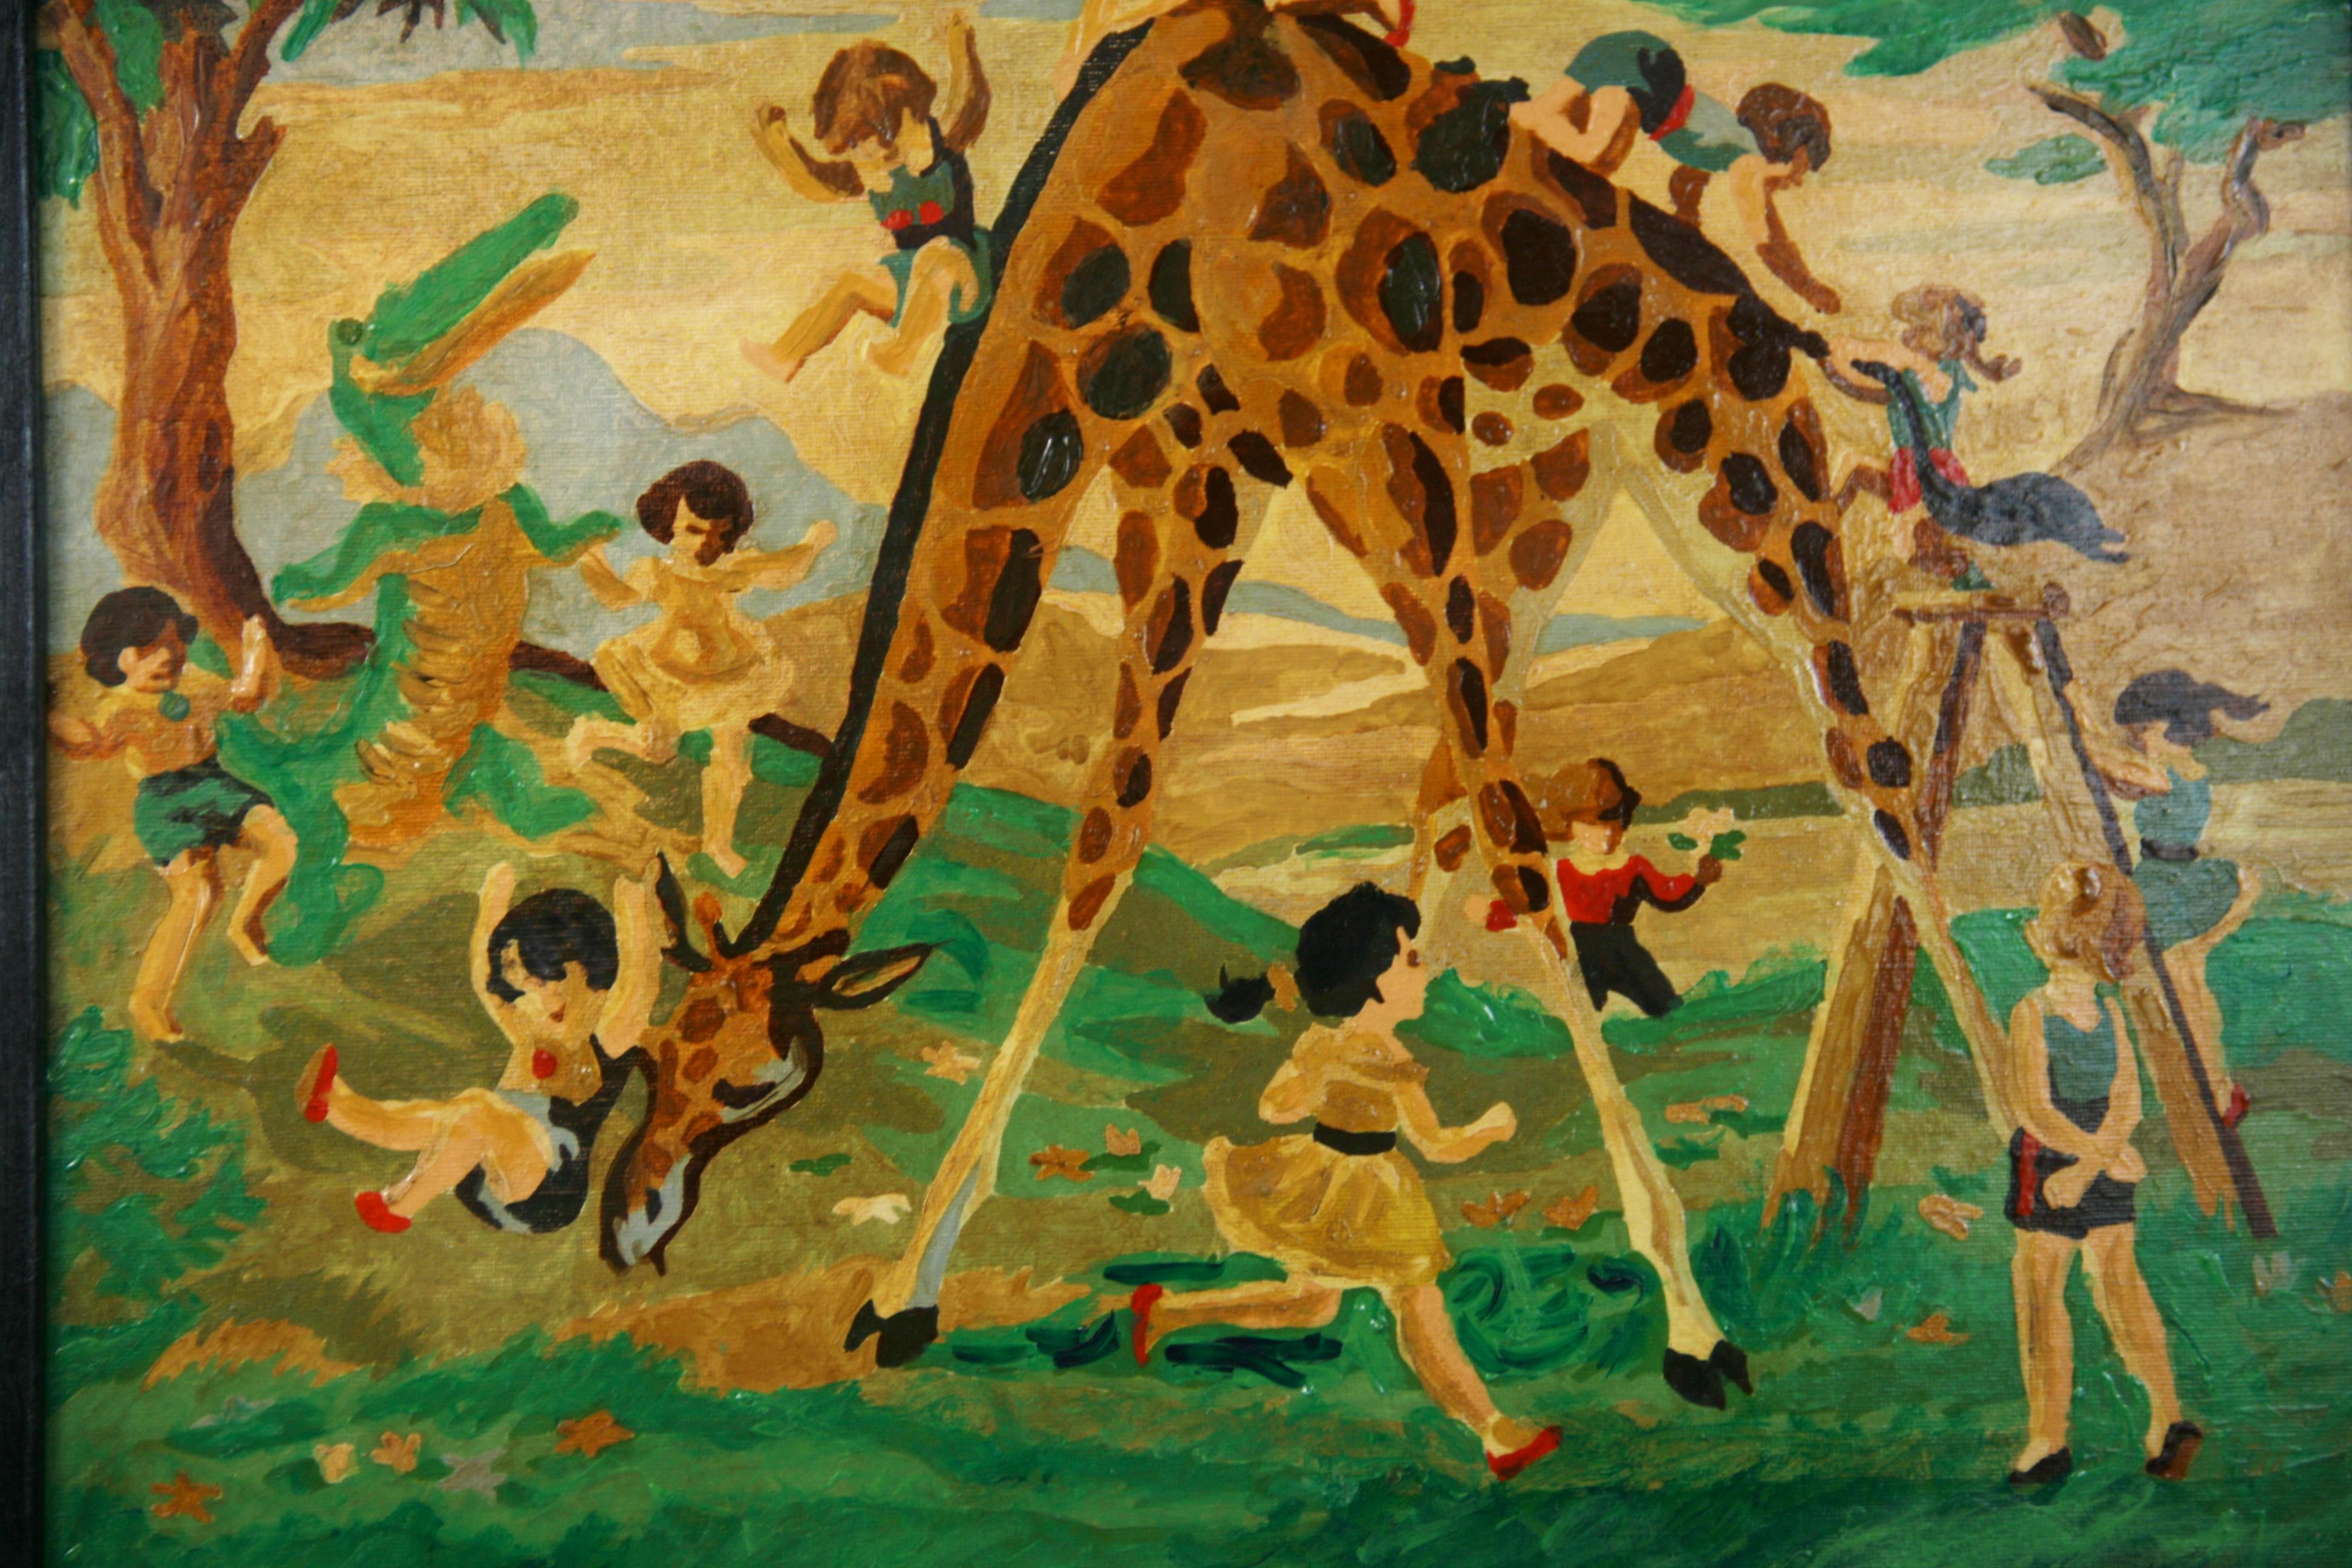 Riding a Giraffe Surreal  Oil Painting 1956 For Sale 2